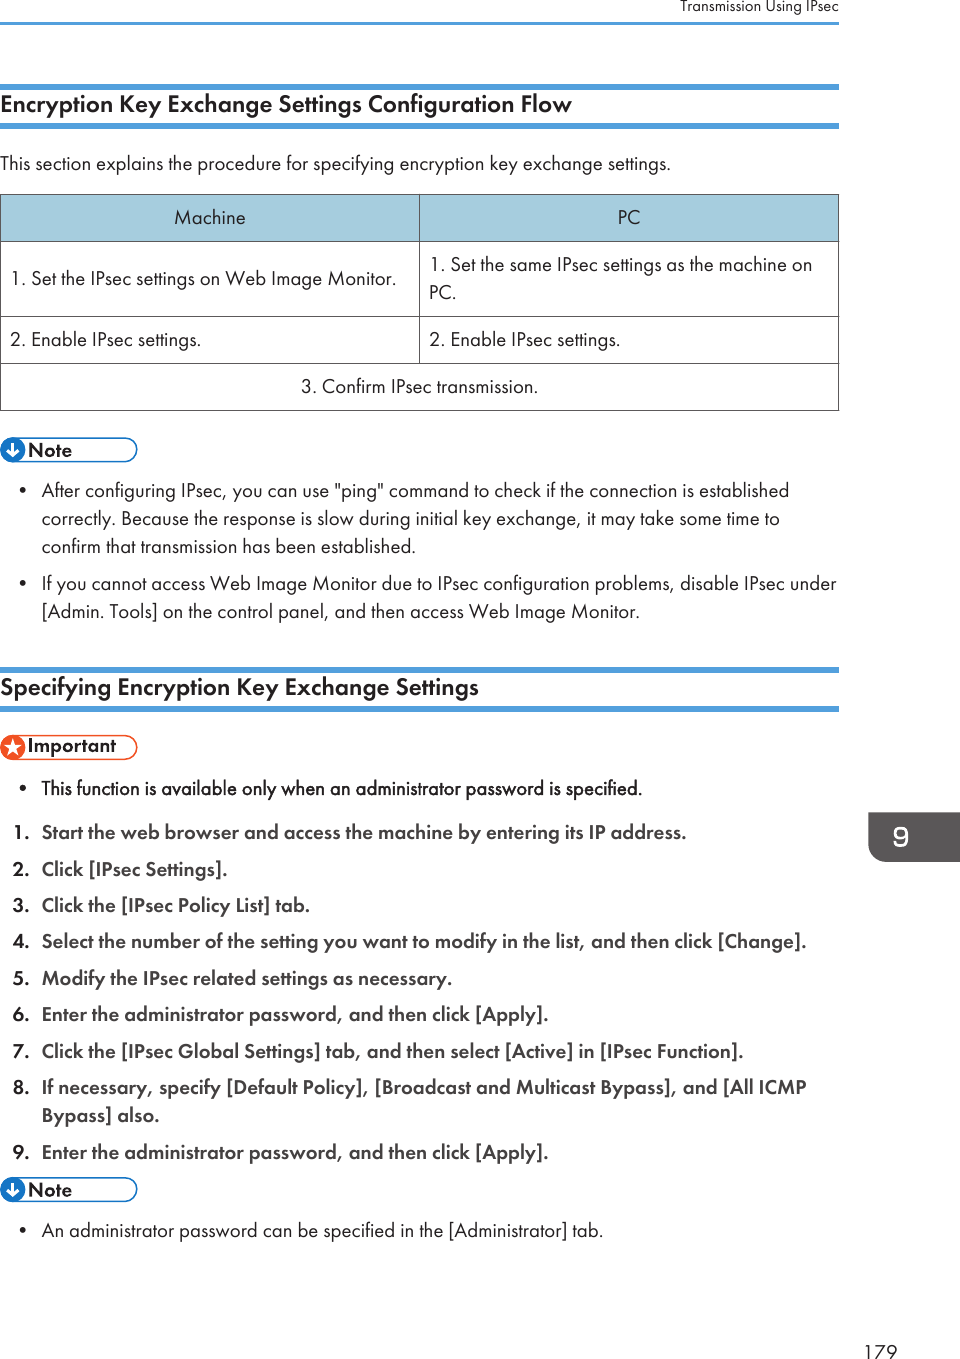 Encryption Key Exchange Settings Configuration FlowThis section explains the procedure for specifying encryption key exchange settings.Machine PC1. Set the IPsec settings on Web Image Monitor. 1. Set the same IPsec settings as the machine onPC.2. Enable IPsec settings. 2. Enable IPsec settings.3. Confirm IPsec transmission.• After configuring IPsec, you can use &quot;ping&quot; command to check if the connection is establishedcorrectly. Because the response is slow during initial key exchange, it may take some time toconfirm that transmission has been established.• If you cannot access Web Image Monitor due to IPsec configuration problems, disable IPsec under[Admin. Tools] on the control panel, and then access Web Image Monitor.Specifying Encryption Key Exchange Settings• This function is available only when an administrator password is specified.1. Start the web browser and access the machine by entering its IP address.2. Click [IPsec Settings].3. Click the [IPsec Policy List] tab.4. Select the number of the setting you want to modify in the list, and then click [Change].5. Modify the IPsec related settings as necessary.6. Enter the administrator password, and then click [Apply].7. Click the [IPsec Global Settings] tab, and then select [Active] in [IPsec Function].8. If necessary, specify [Default Policy], [Broadcast and Multicast Bypass], and [All ICMPBypass] also.9. Enter the administrator password, and then click [Apply].• An administrator password can be specified in the [Administrator] tab.Transmission Using IPsec179